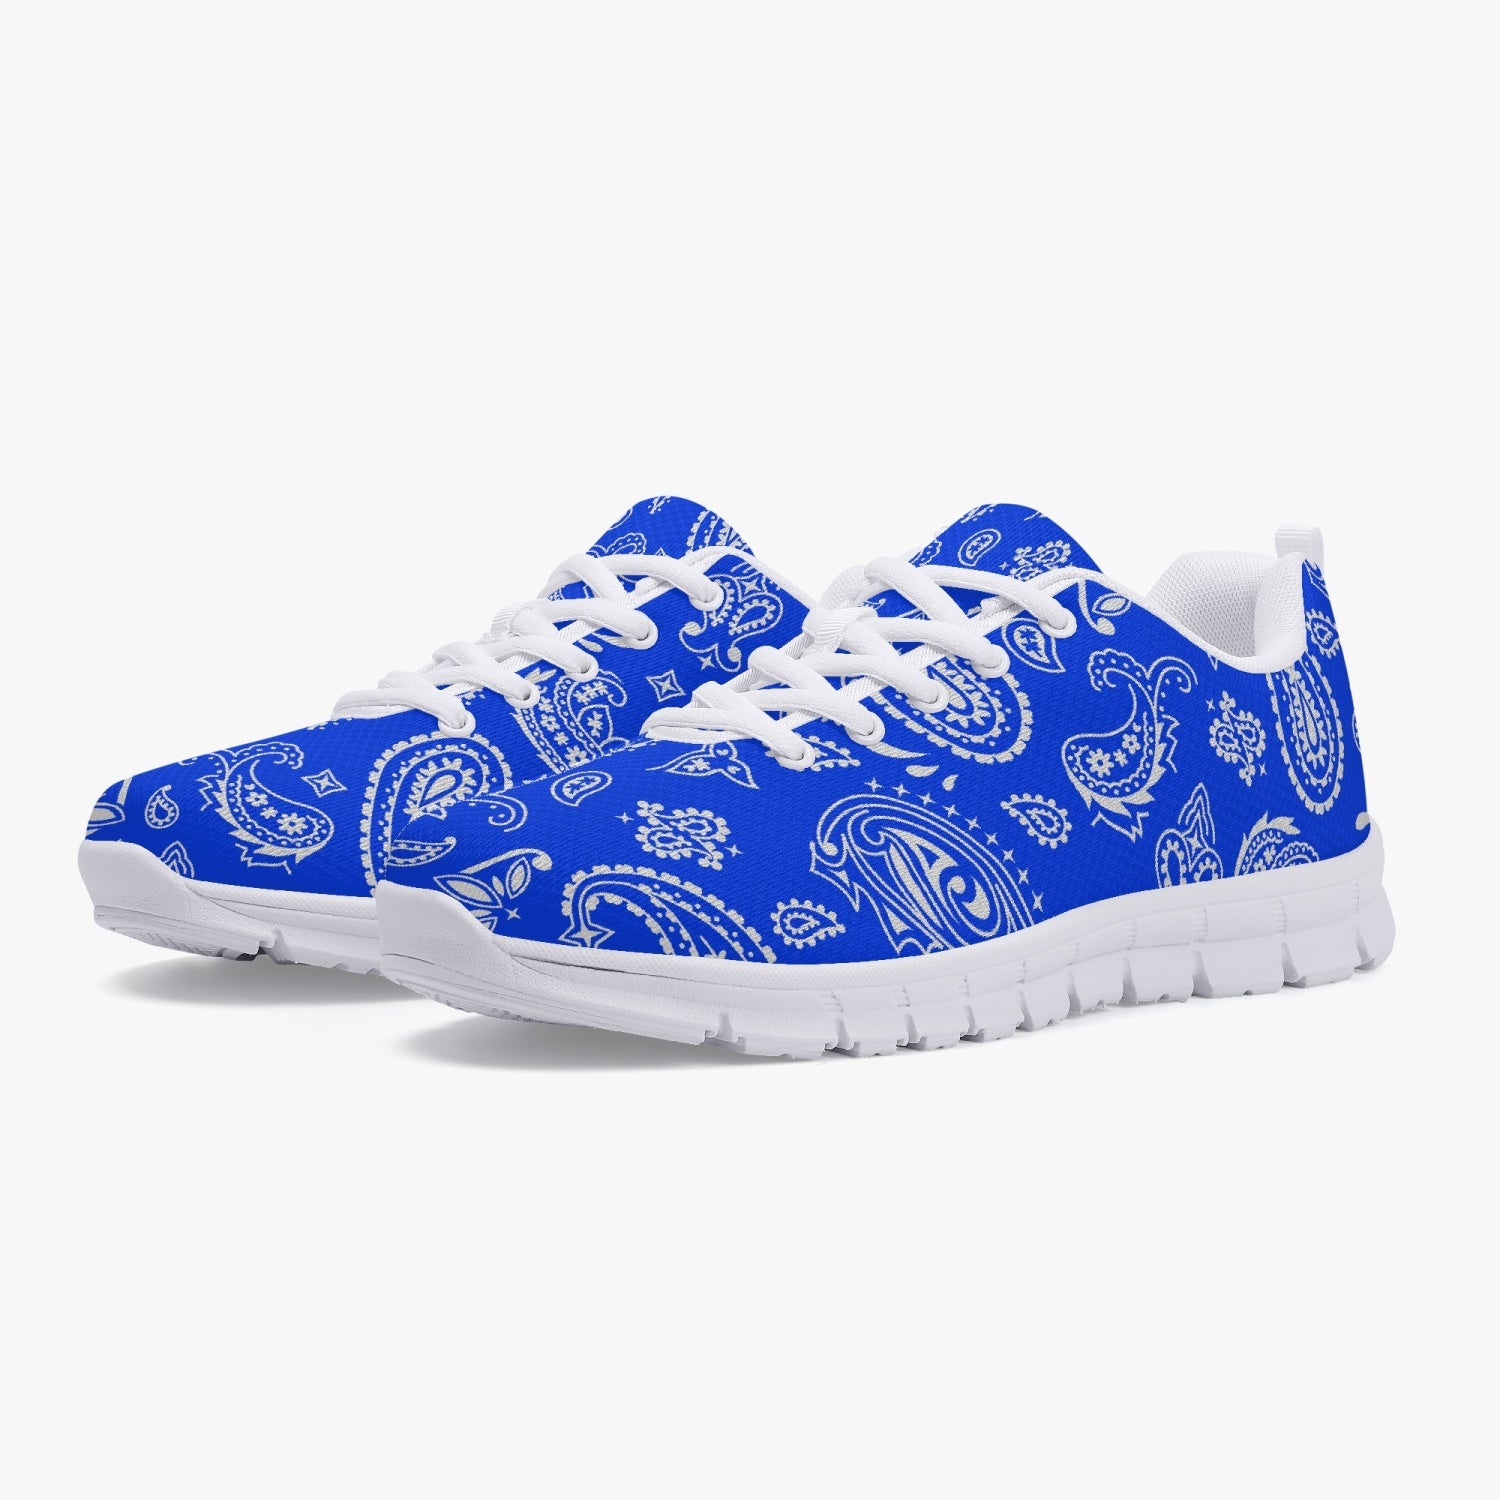 Women's Classic Blue White Paisley Bandana Gym Workout Sneakers Overview